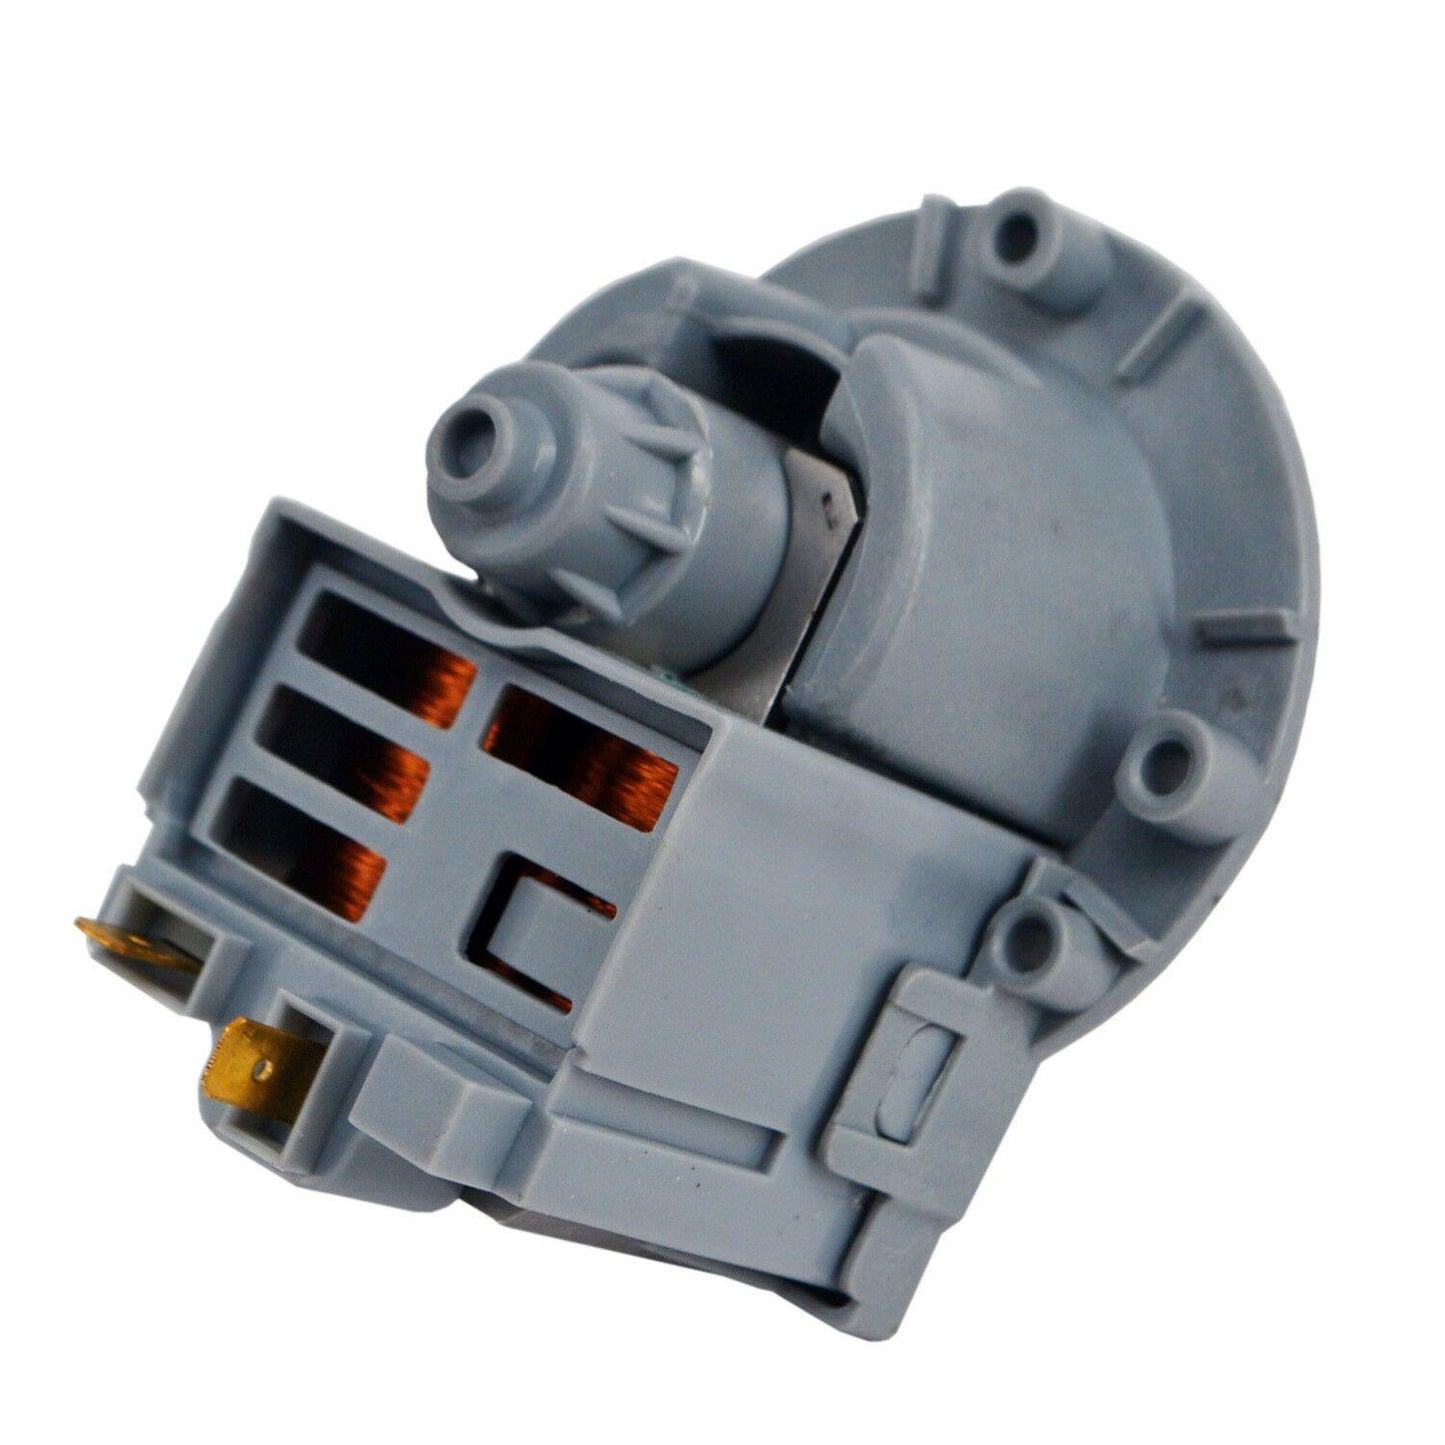 Washing Machine Water Drain Pump For LG WD14022D6 WD13050SD WD13020D1 WD12595FD6 Sparesbarn